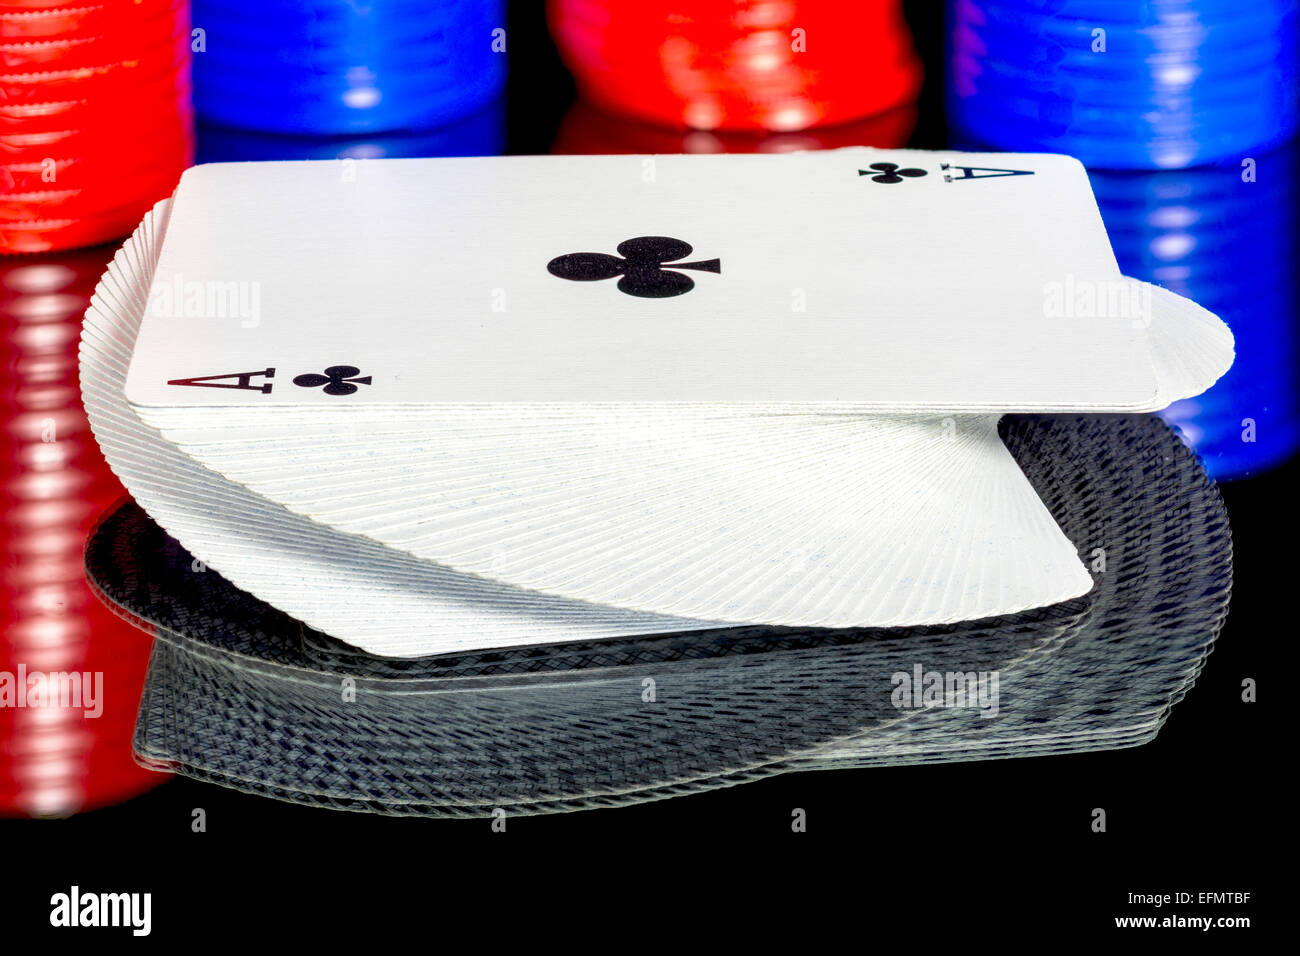 Popular game with chips and cards Stock Photo